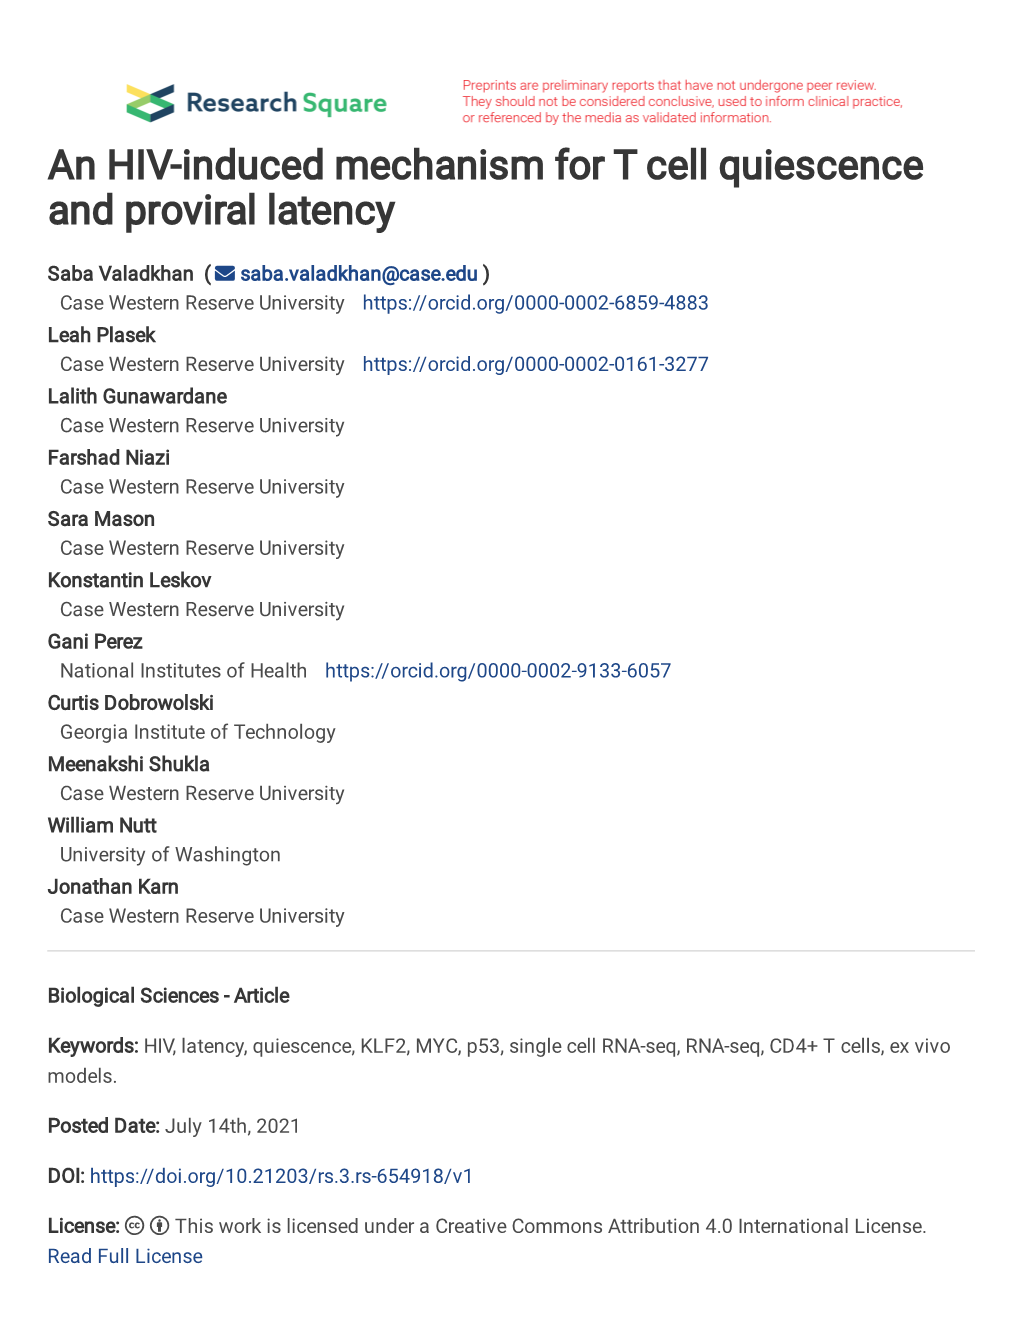 An HIV-Induced Mechanism for T Cell Quiescence and Proviral Latency